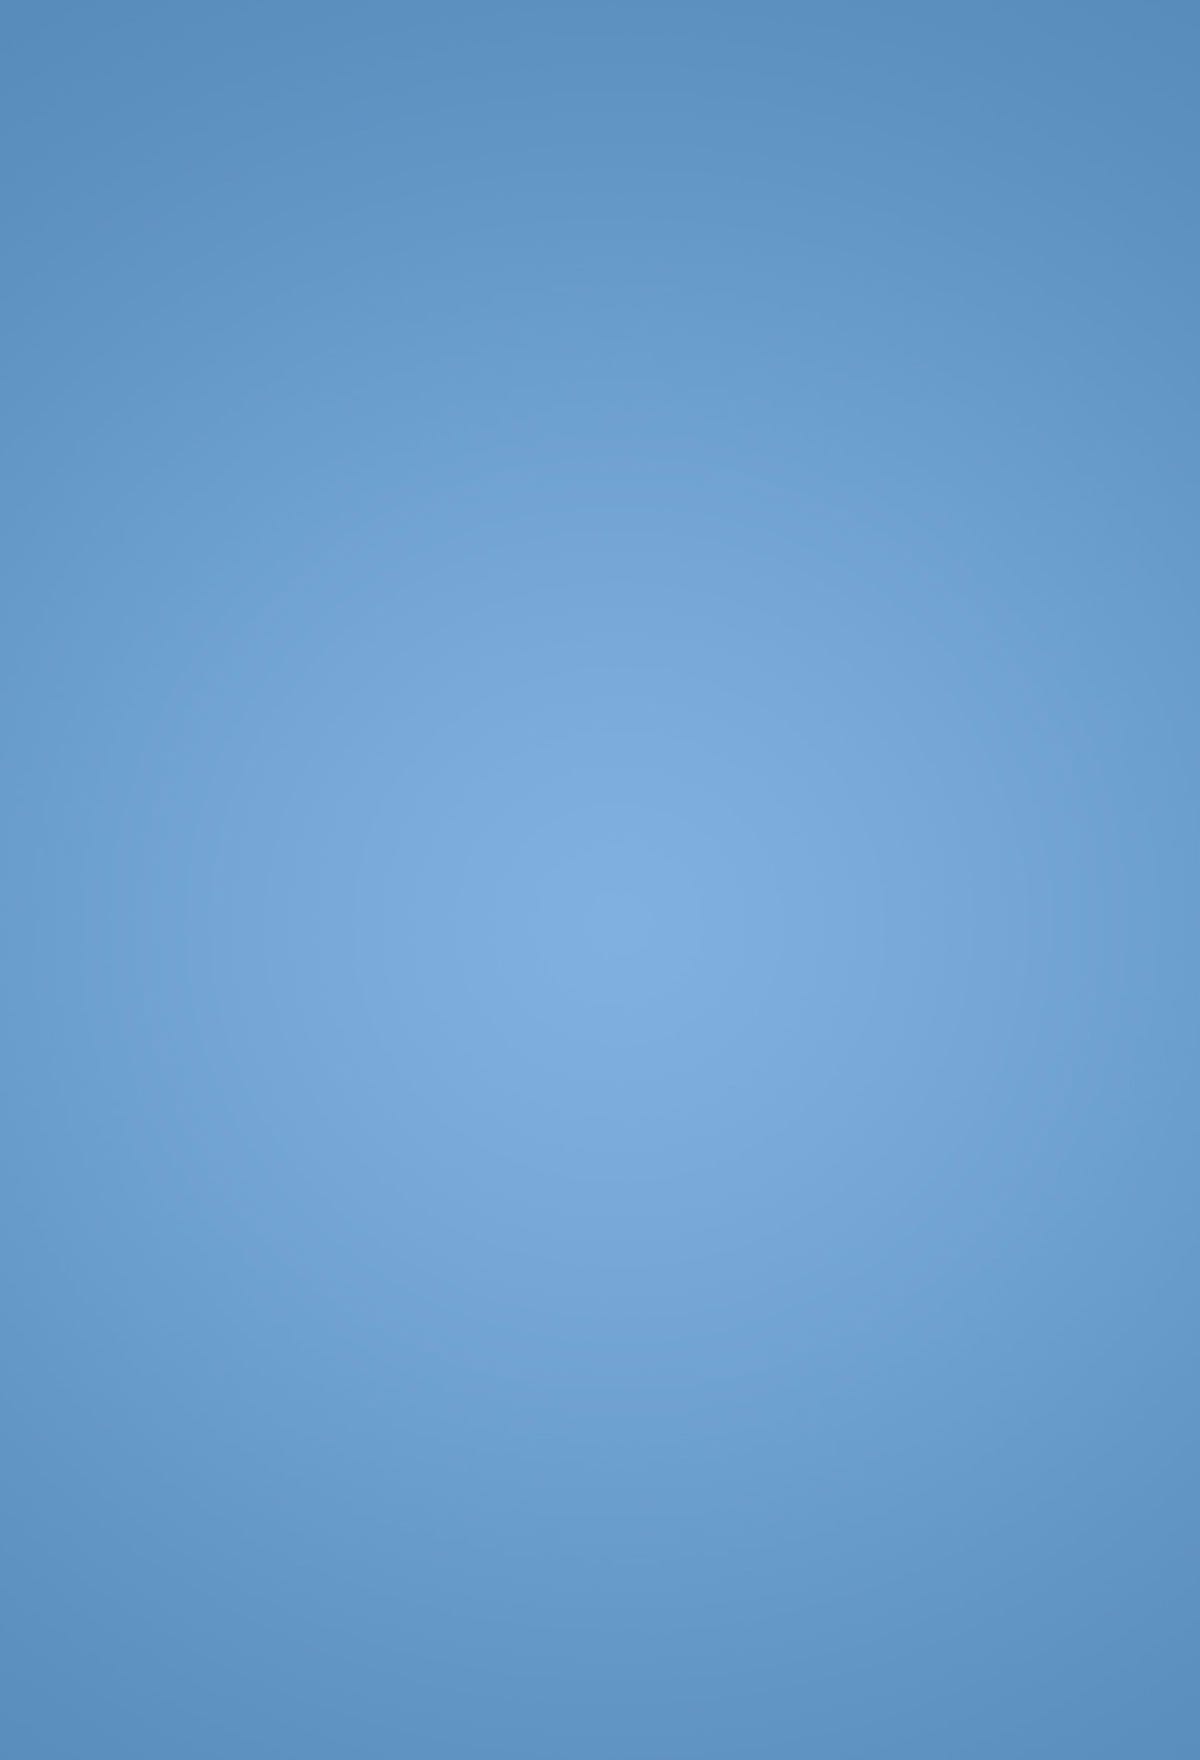 light blue solid background backdrop 3x5 photography